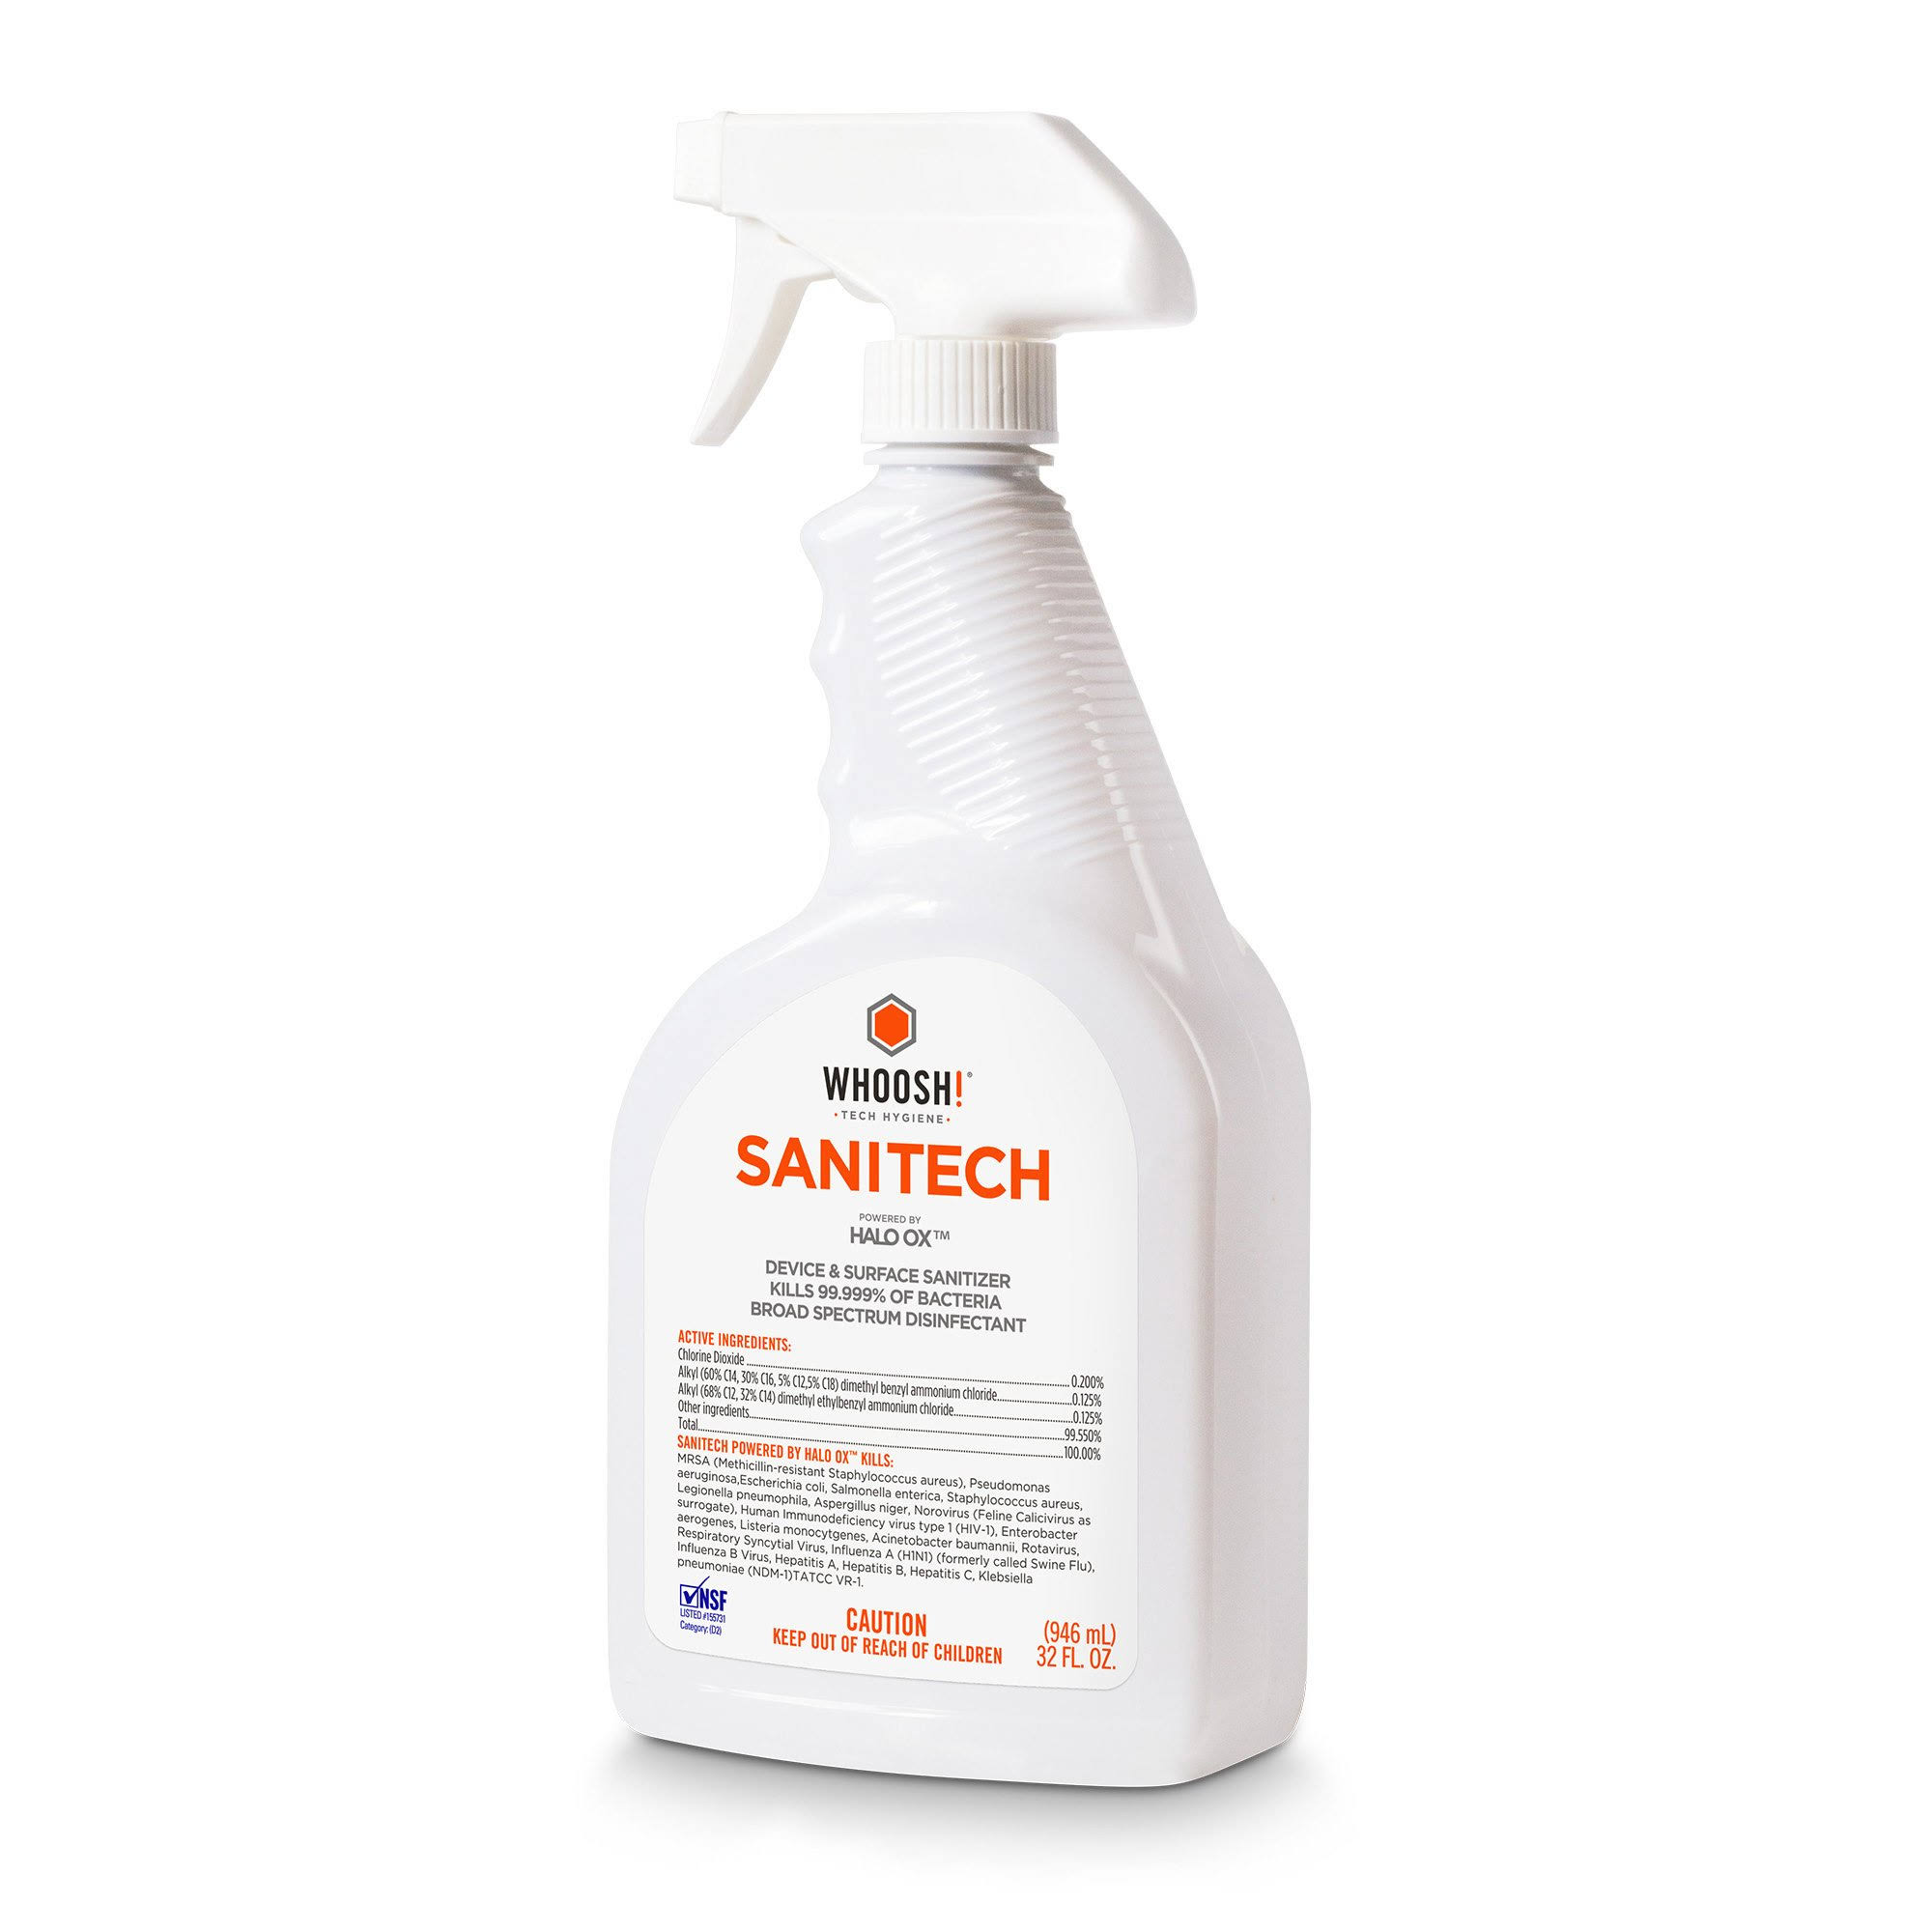 WHOOSH Sanitech 946mL Disinfectant Sprayer - 15-08856 by WHOOSH